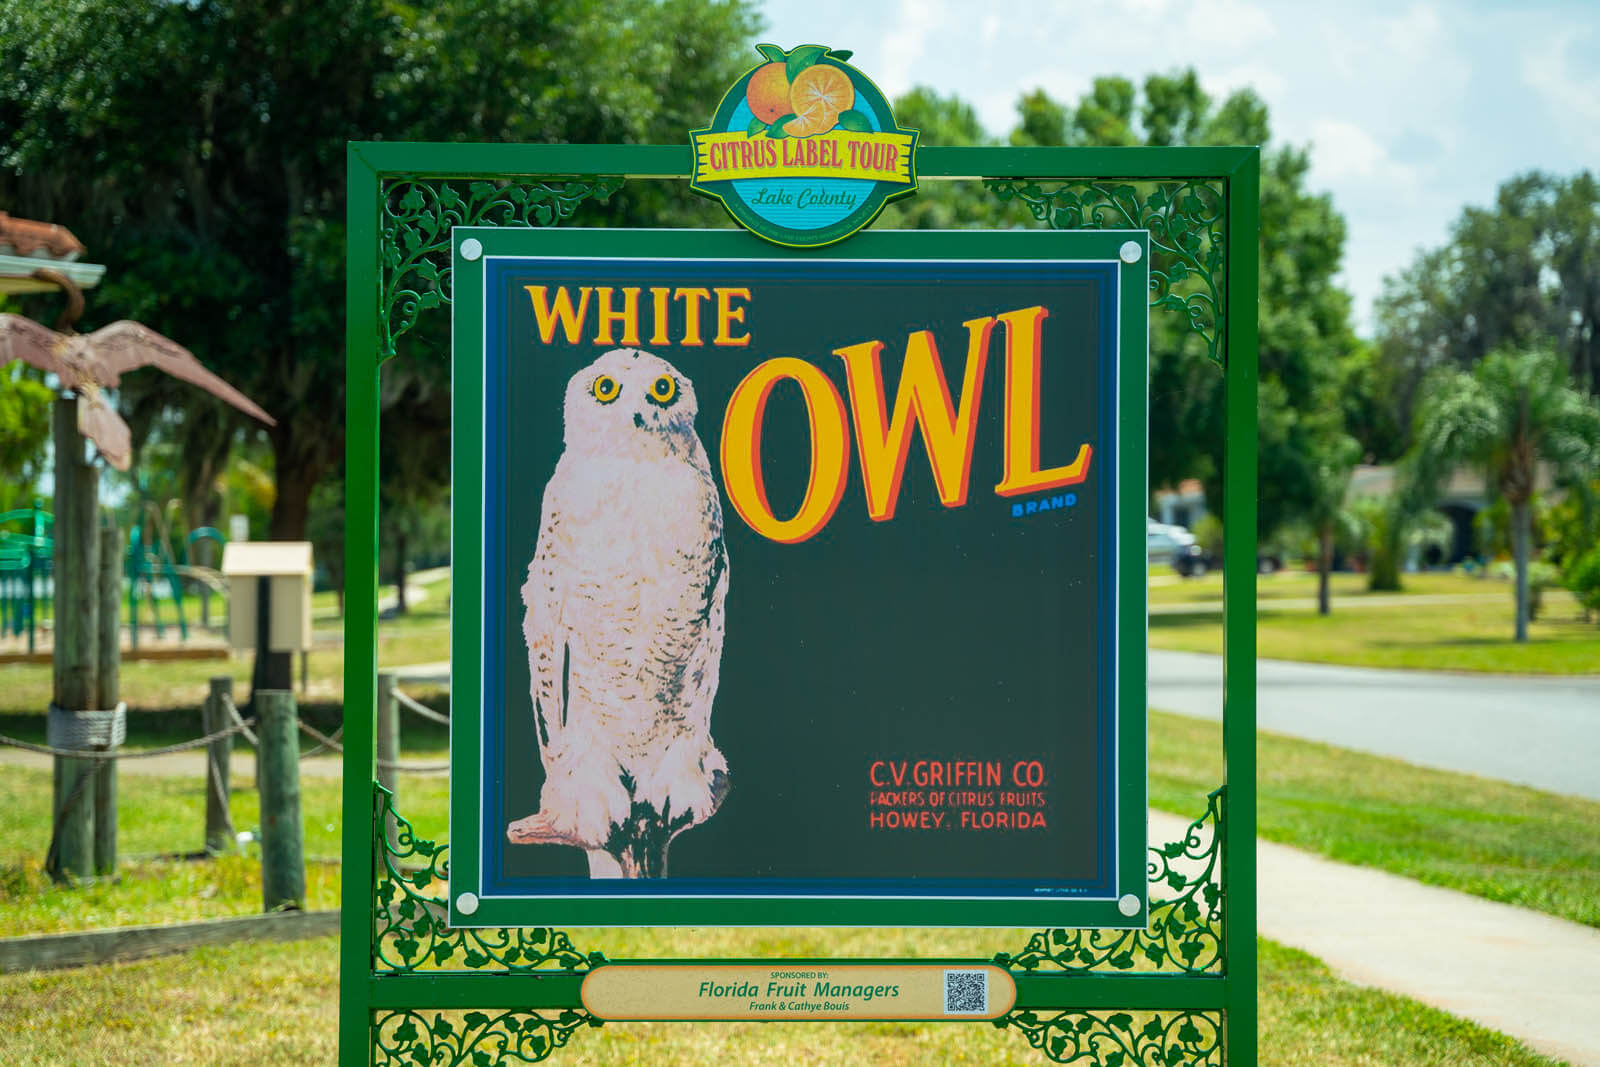 White Owl Citrus Label in Howey-in-the-Hills in Central Florida